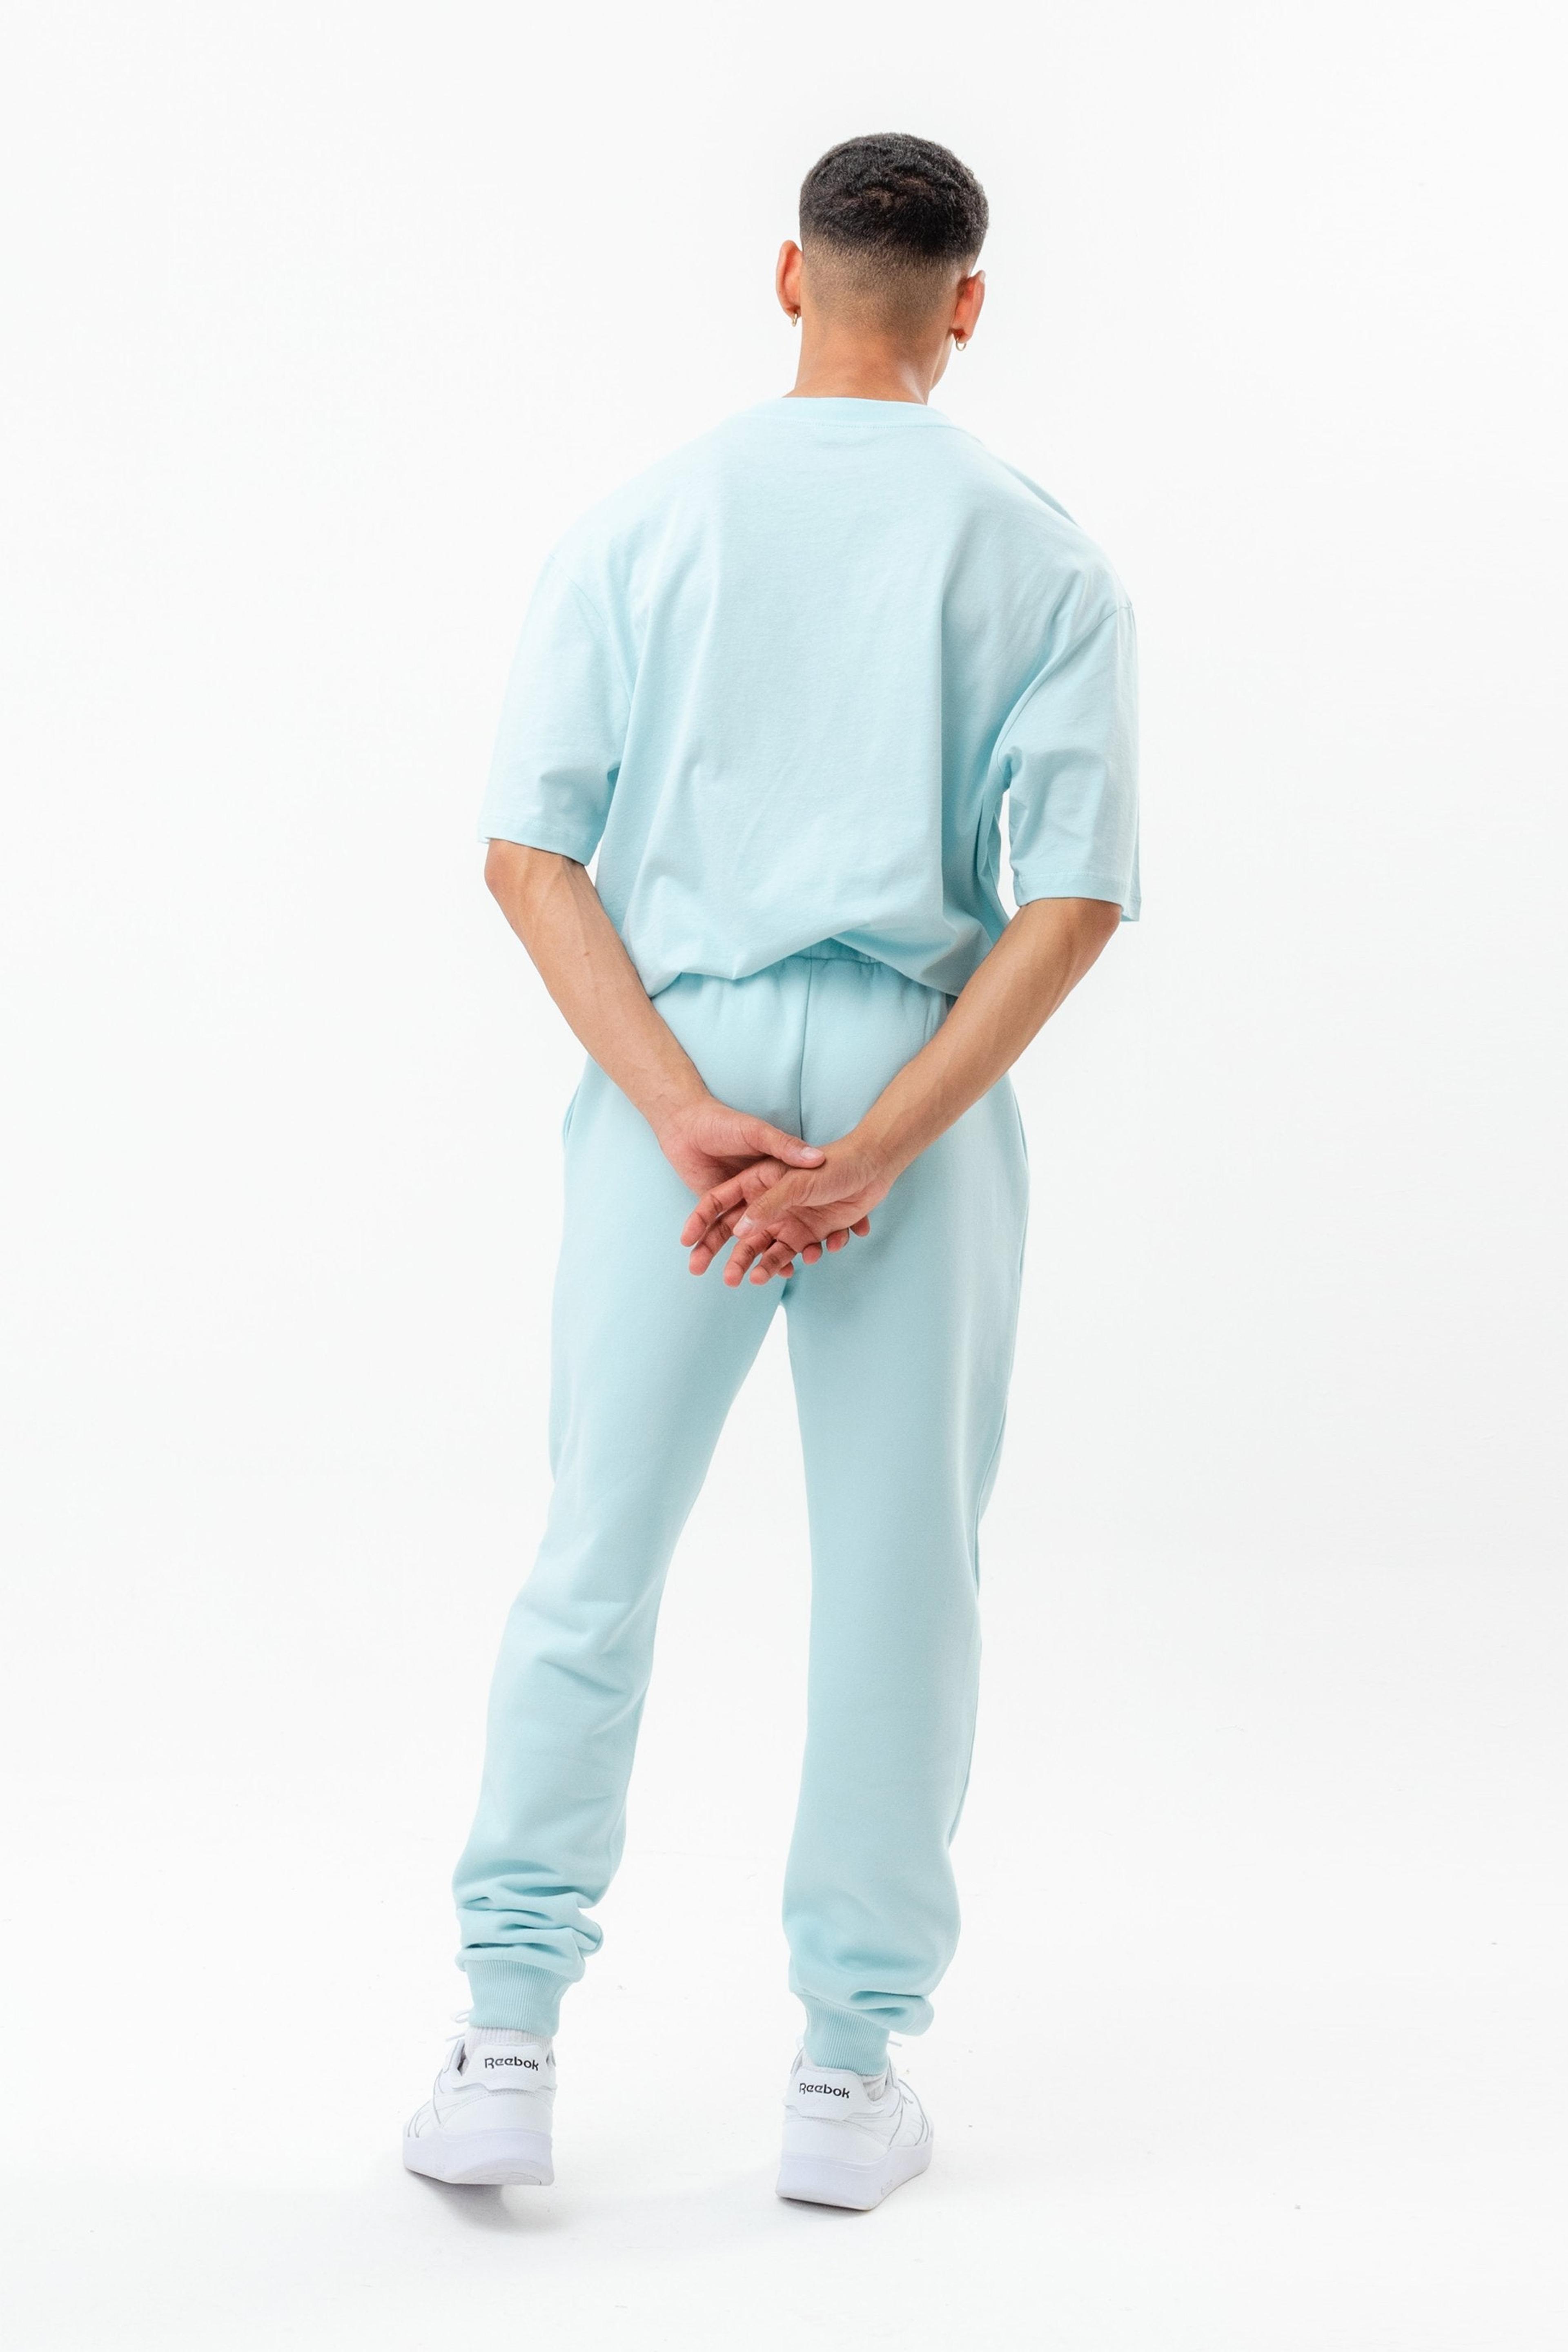 Alternate View 7 of CONTINU8 PALE BLUE OVERSIZED T-SHIRT